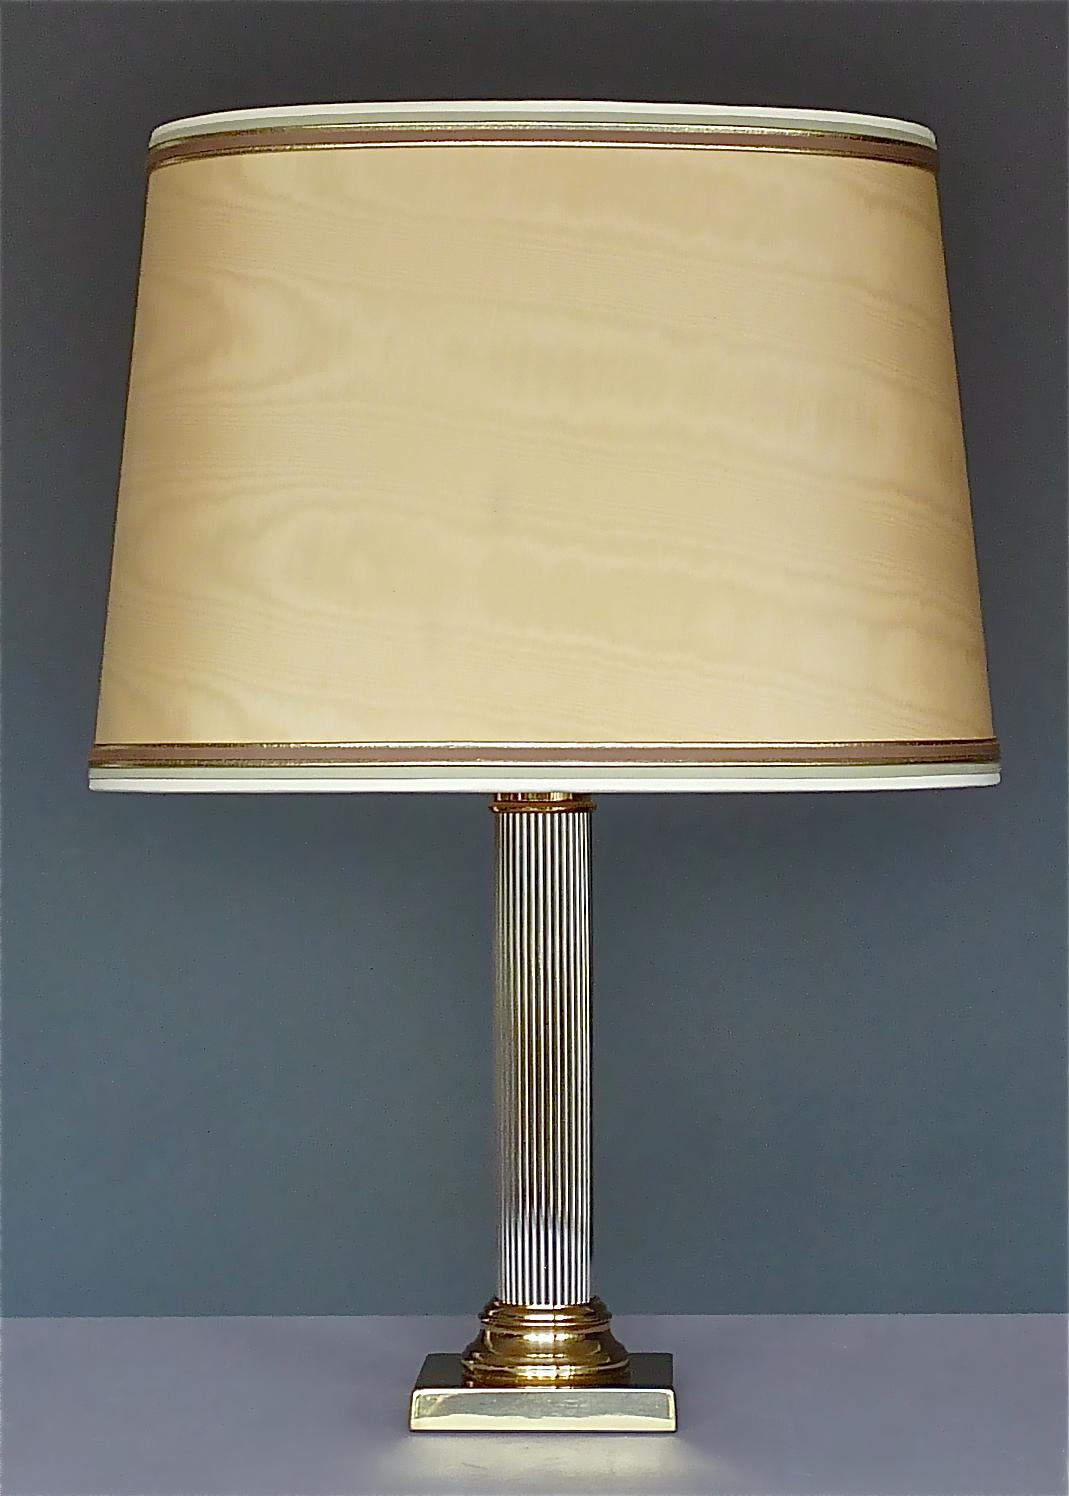 Large Italian Romeo Rega style column table lamp made of gilt brass in combination with chrome, Italy, circa 1970-1980. The beautiful table lamp which exudes a warm and pleasant light is 64 cm / 25.20 inches tall including original oval lamp shade